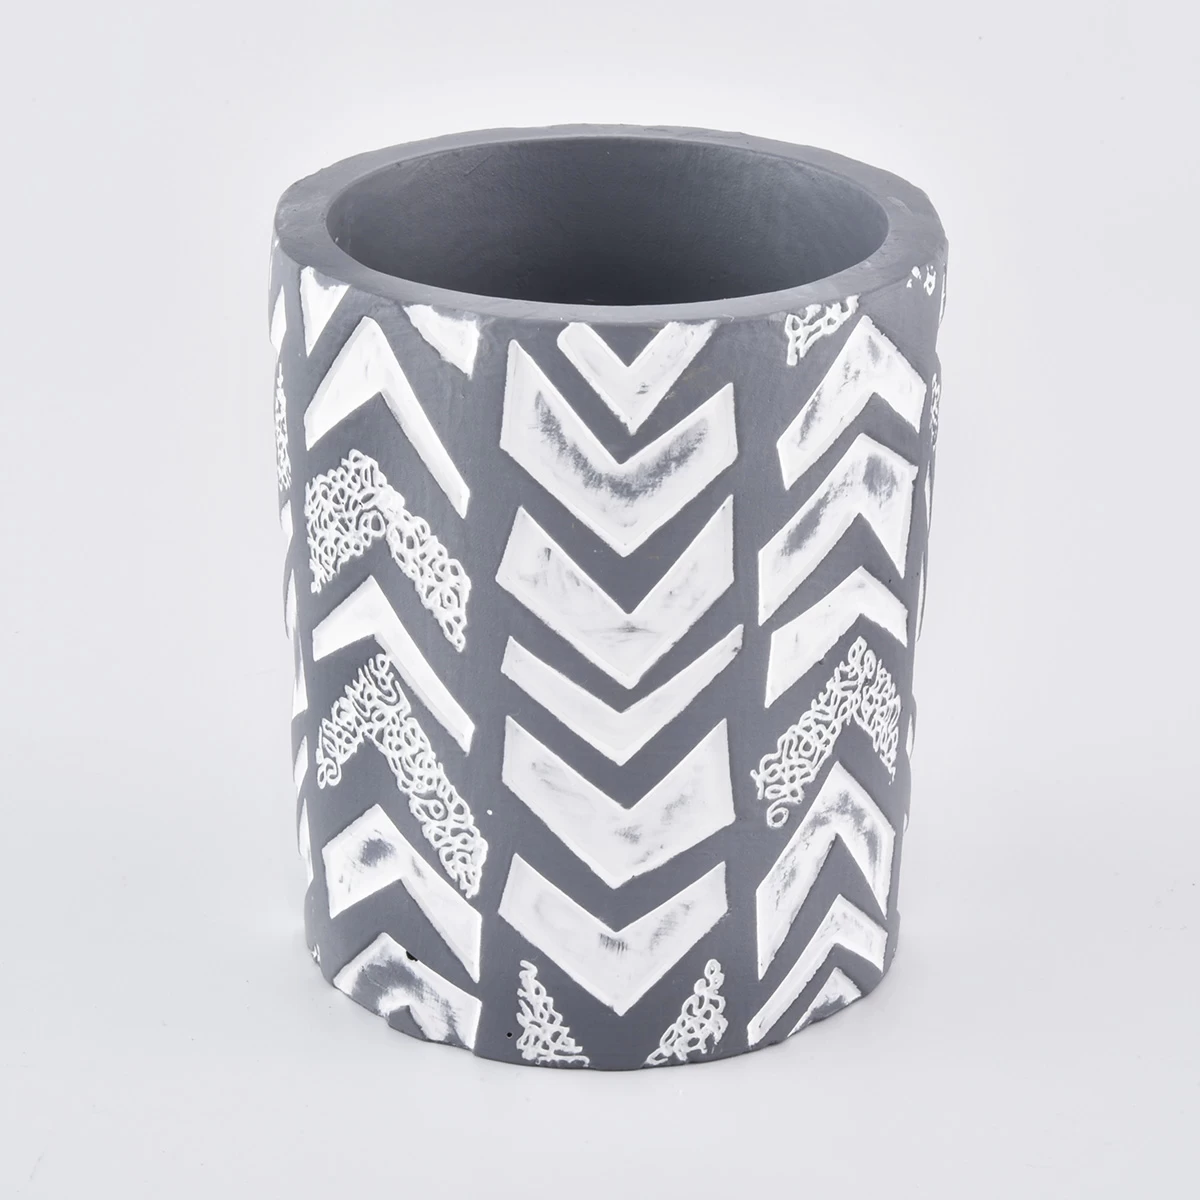 Concrete candle jar with white debossed patterns, decorative candle jars